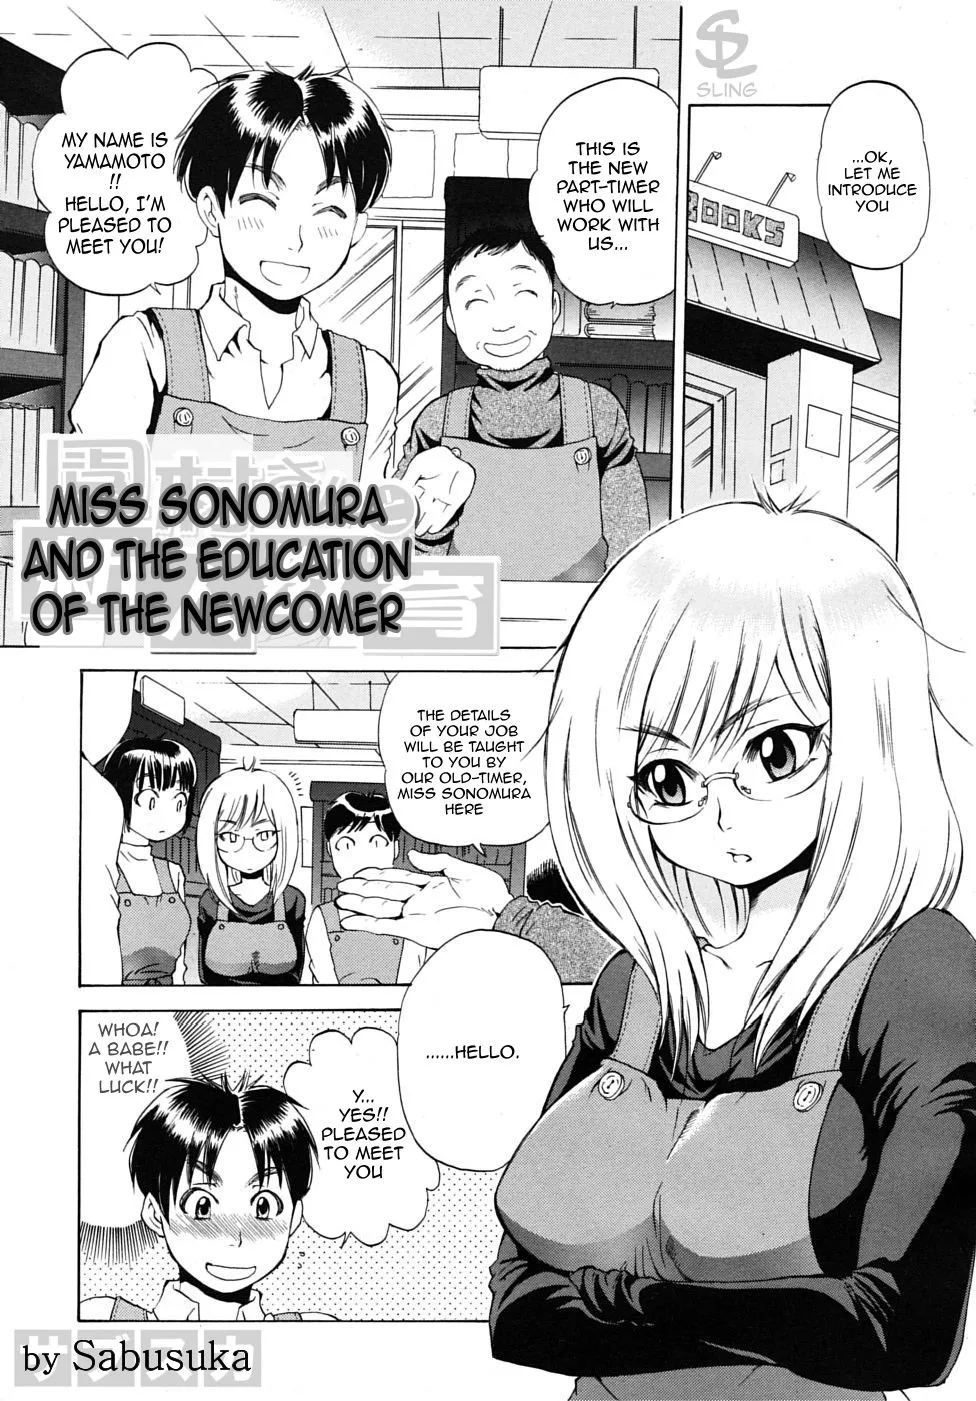 Original,Miss Sonomura And The Education Of The Newcomer [English][第1页]